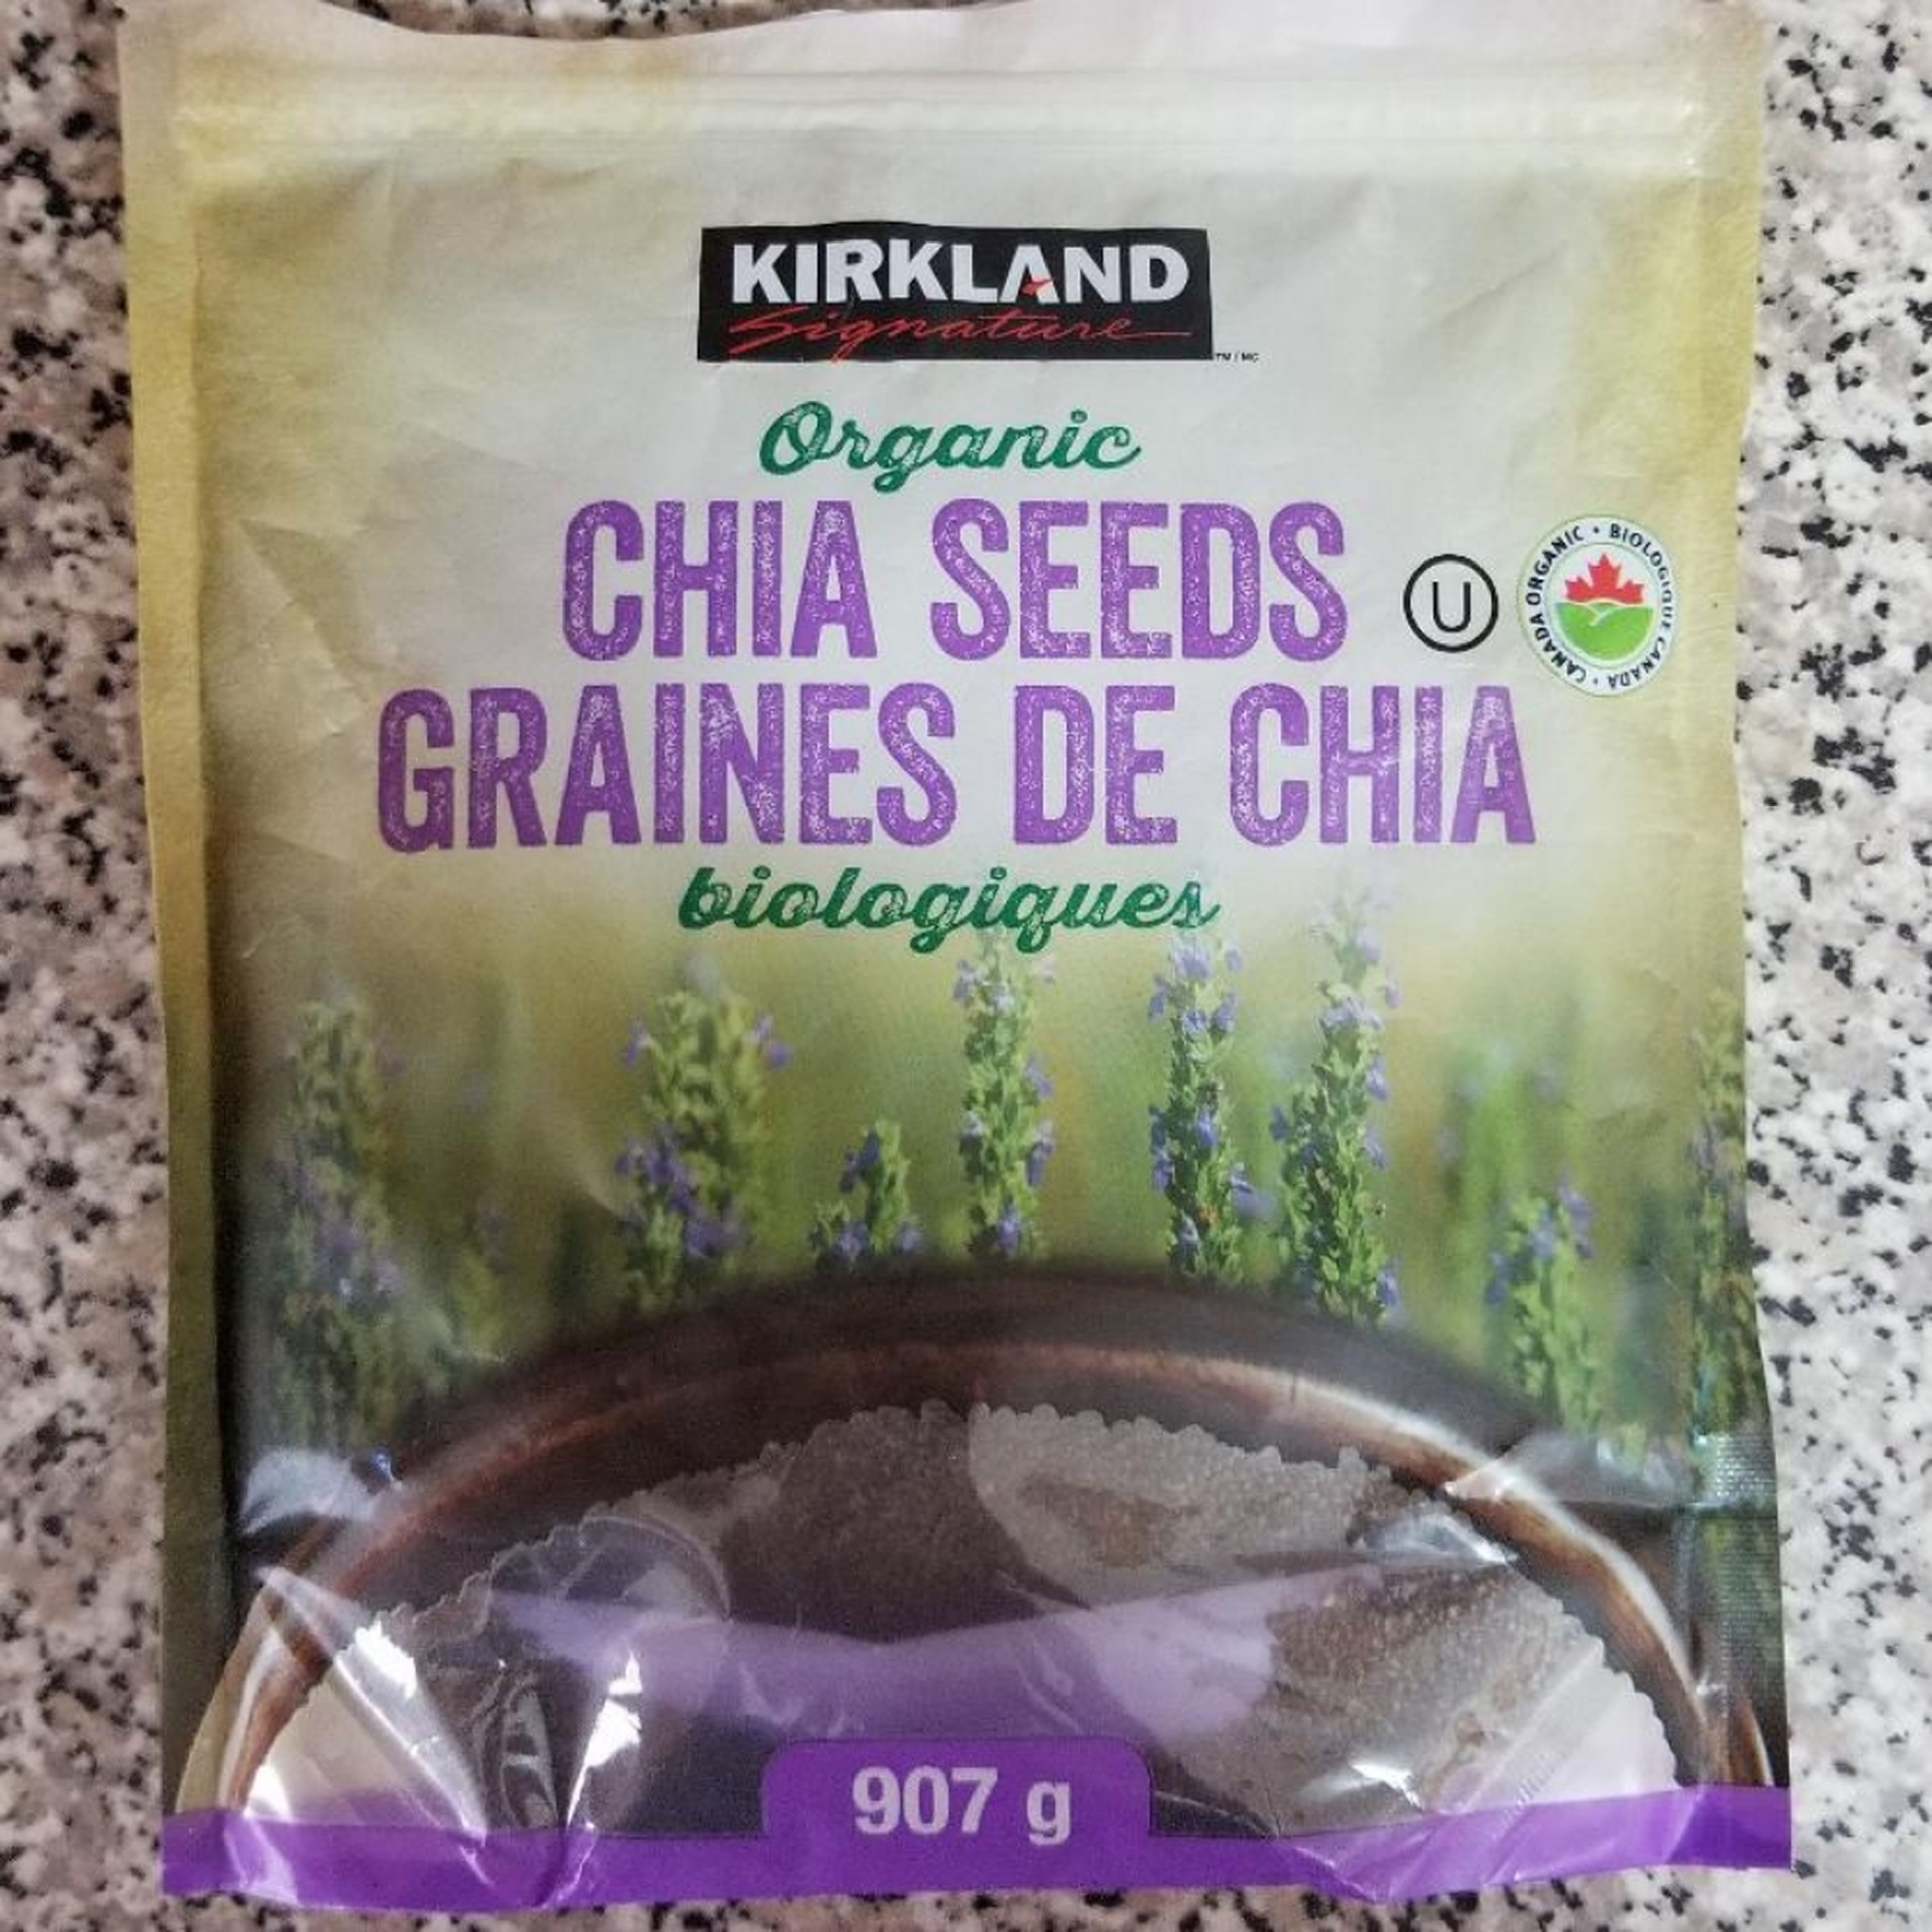 Add 35g whole chia seeds. Available at Costco and Whole Foods.